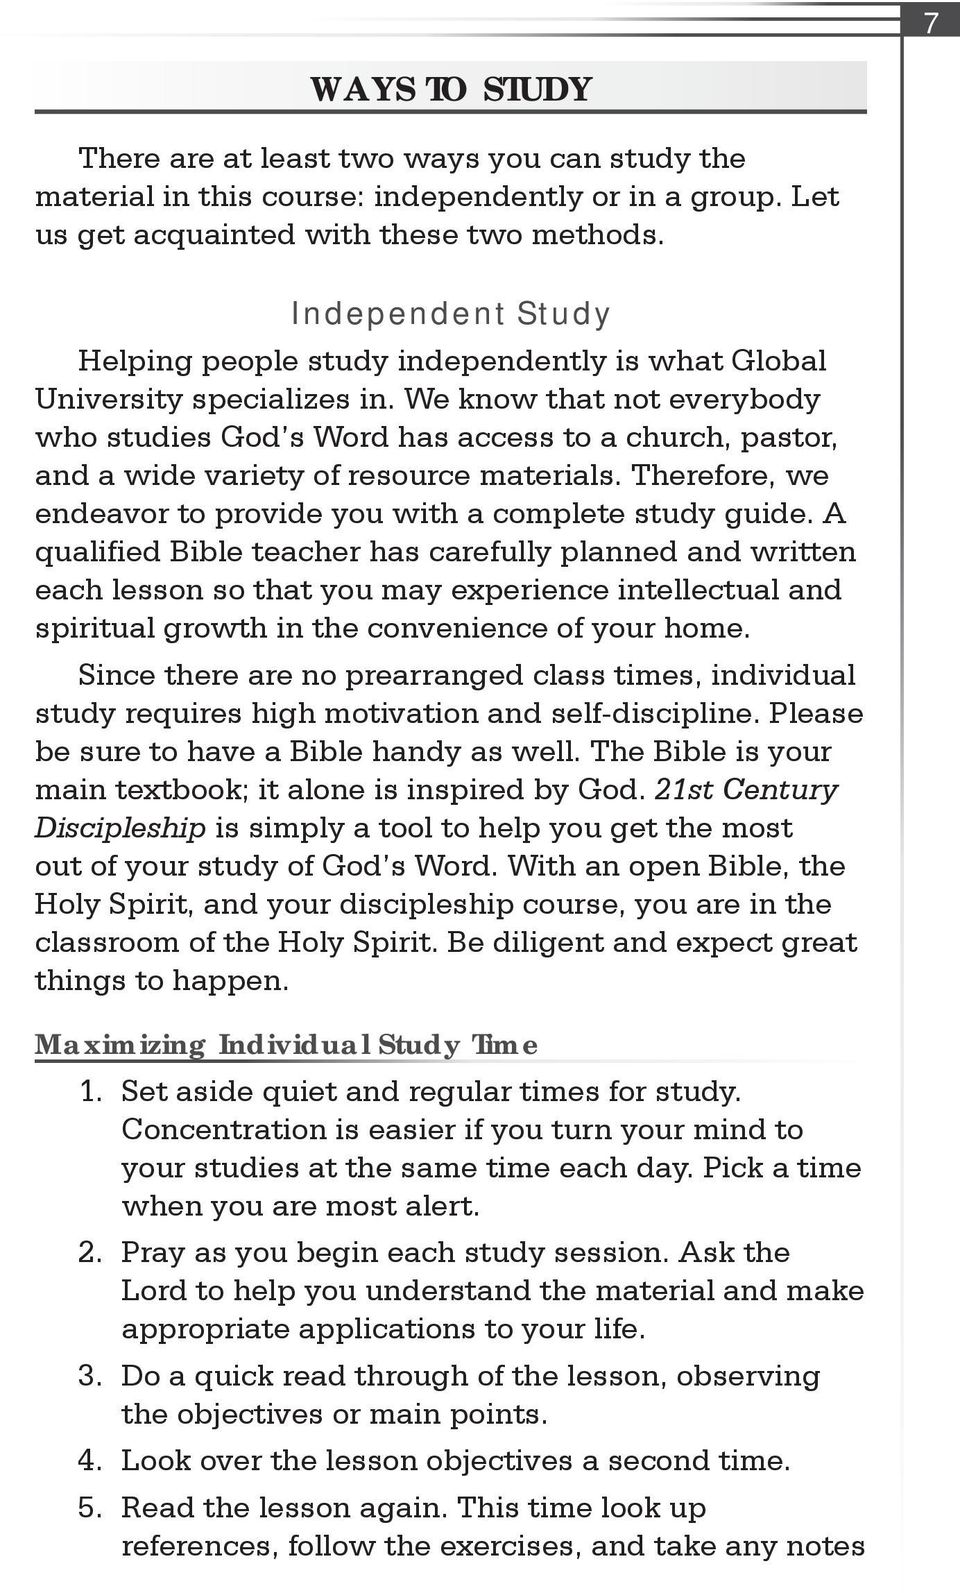 We know that not everybody who studies God s Word has access to a church, pastor, and a wide variety of resource materials. Therefore, we endeavor to provide you with a complete study guide.